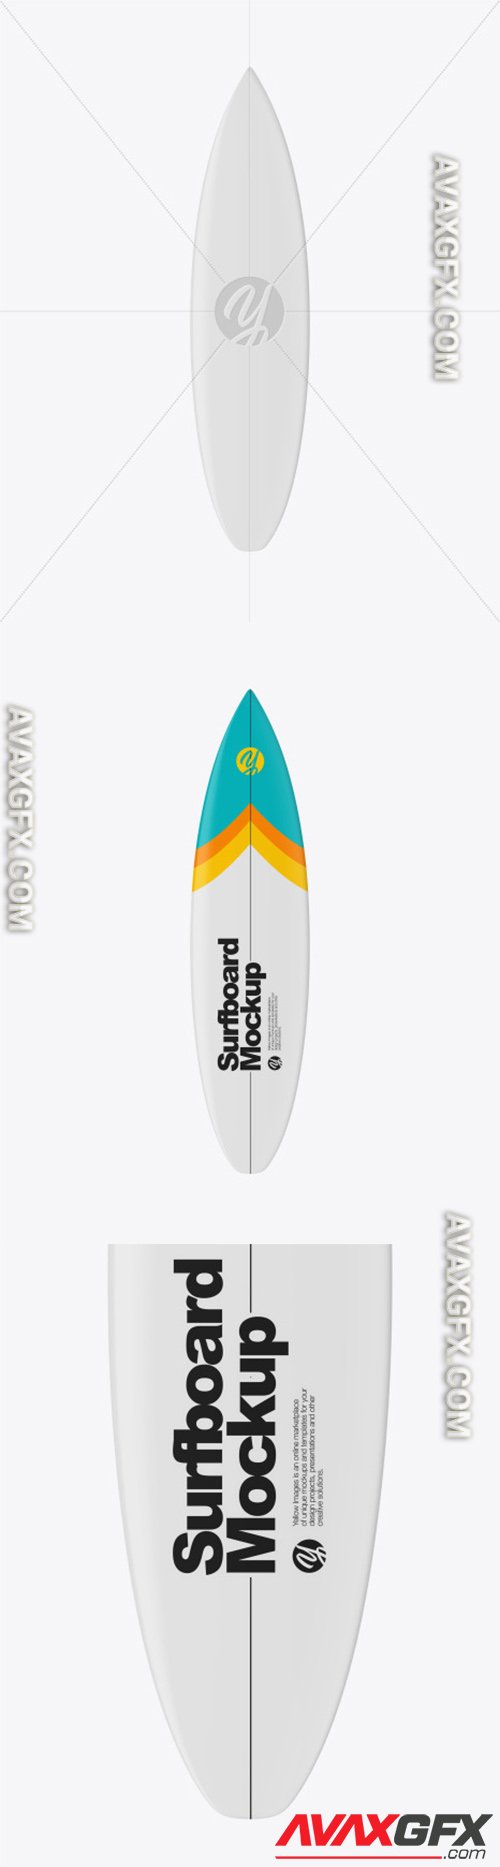 Surfboard Mockup - Front View 52137